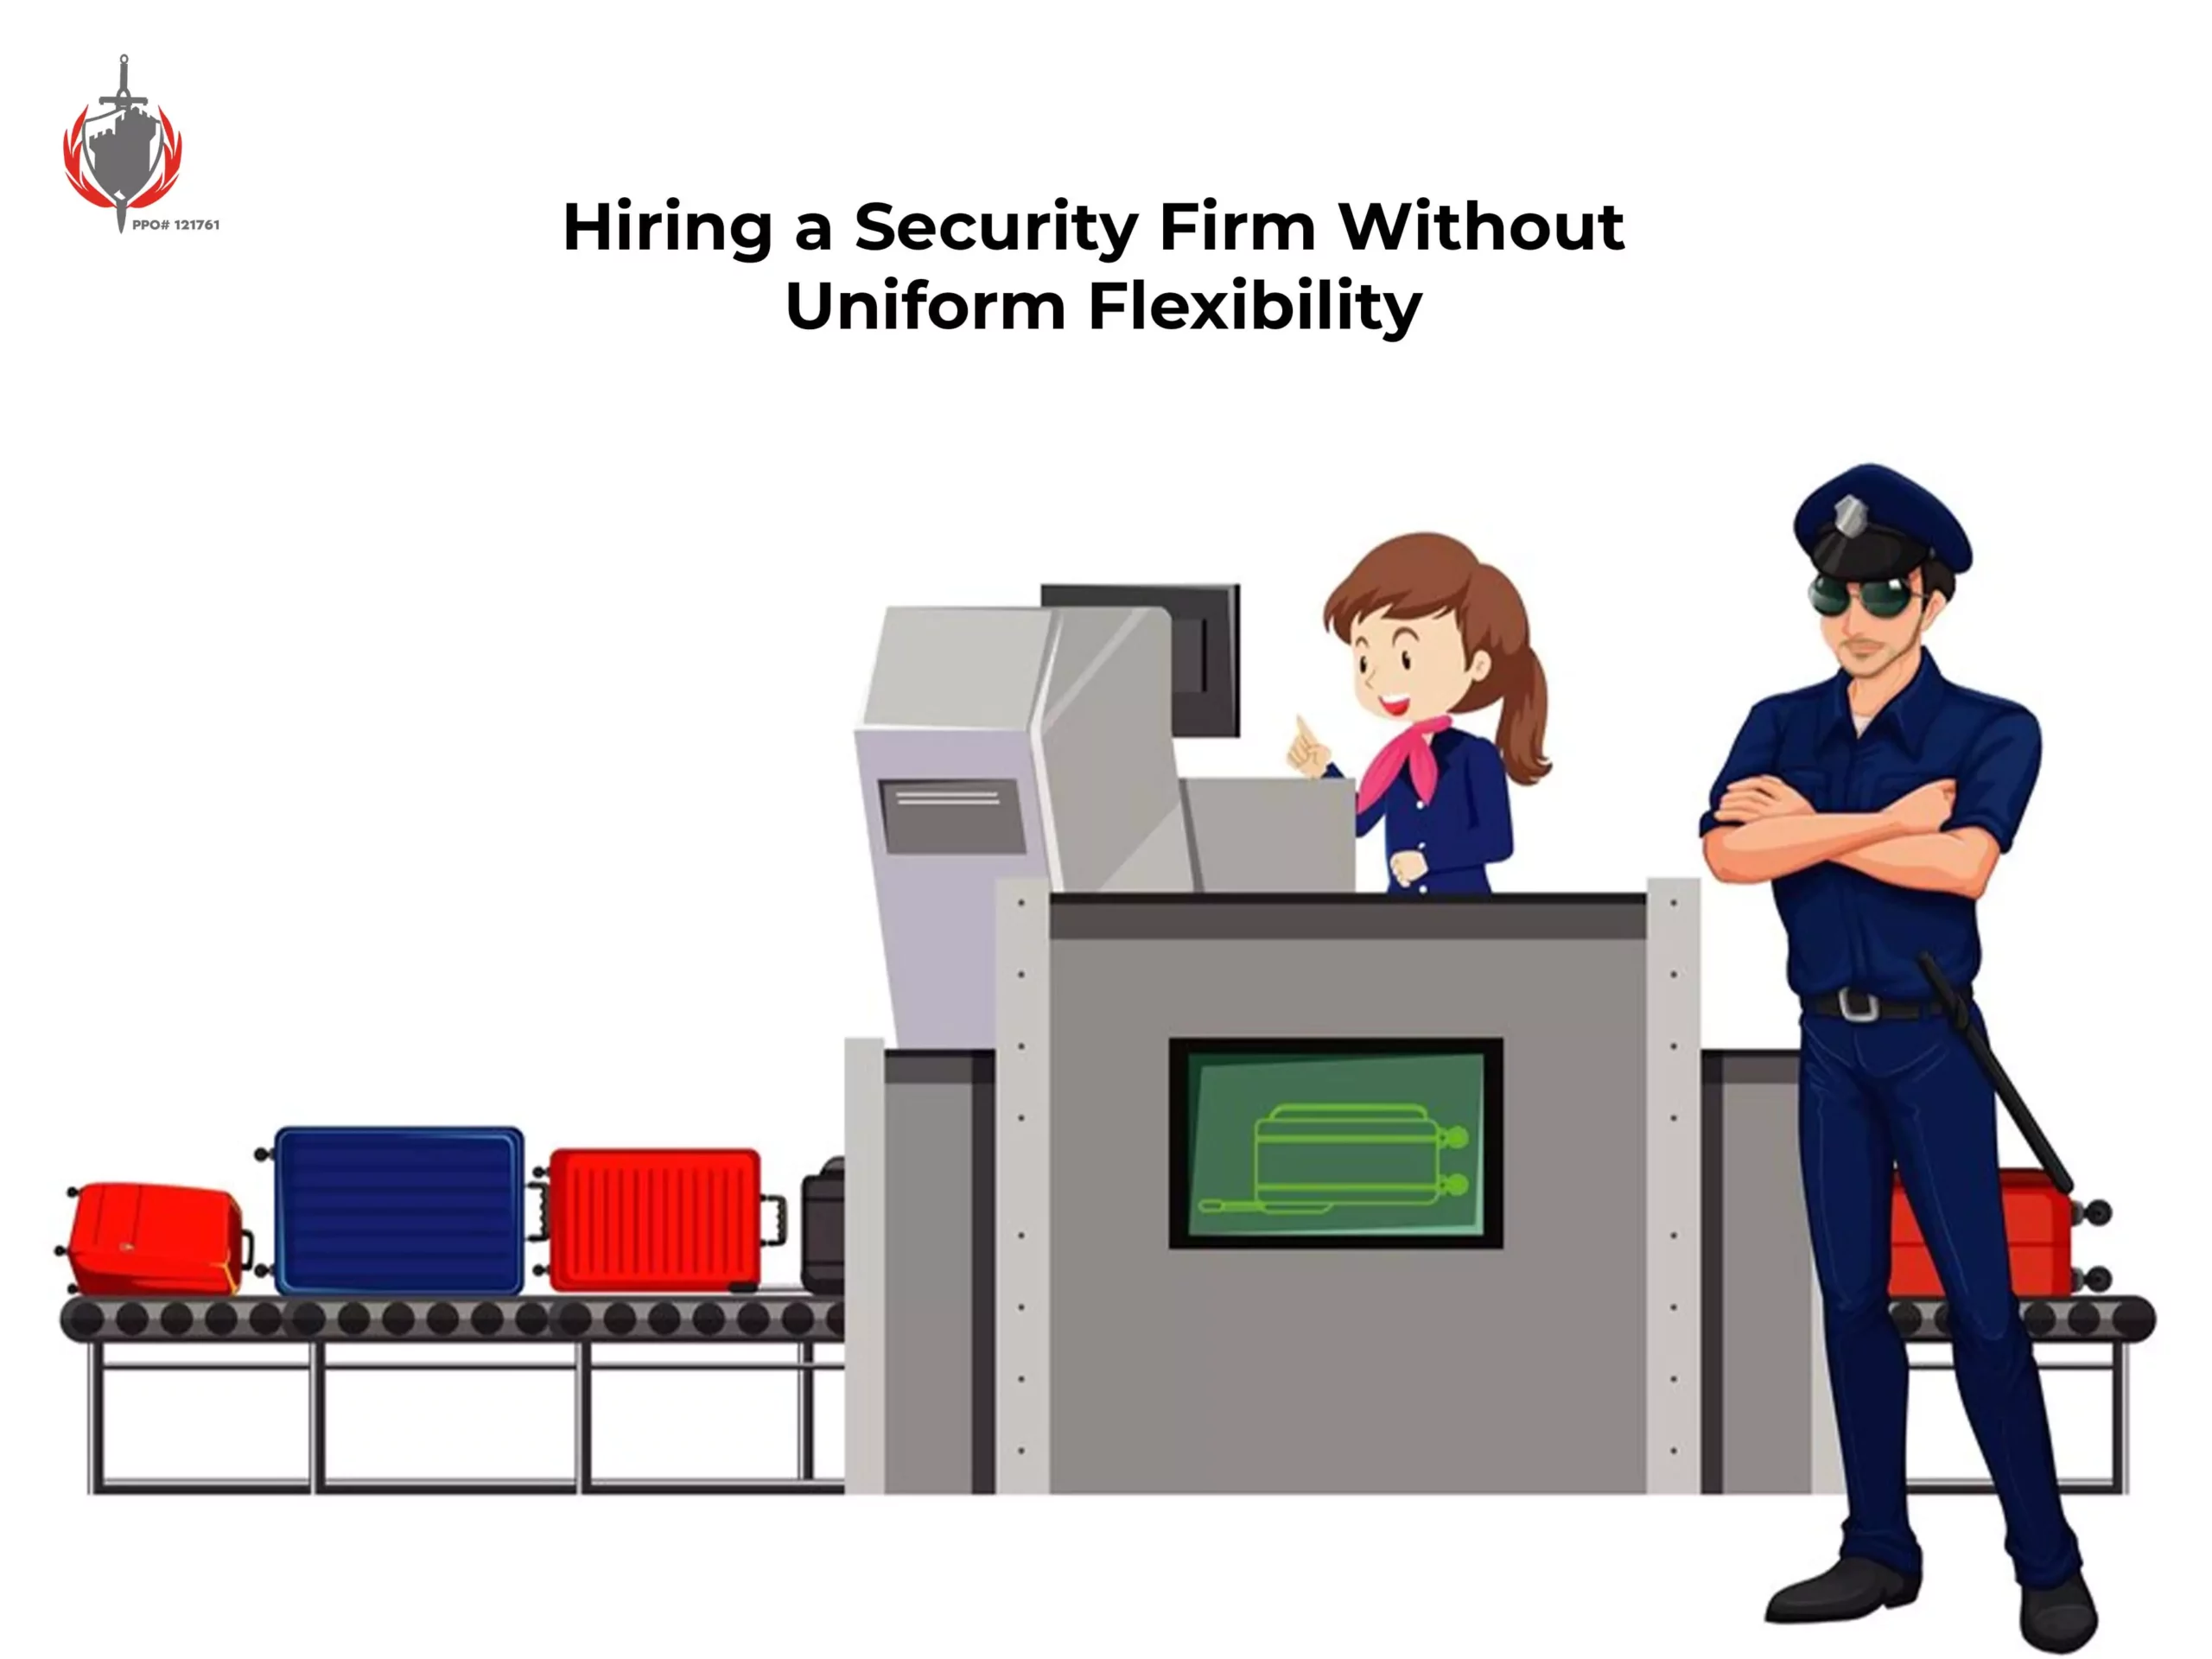 Hiring a Security Firm Without Uniform Flexibility